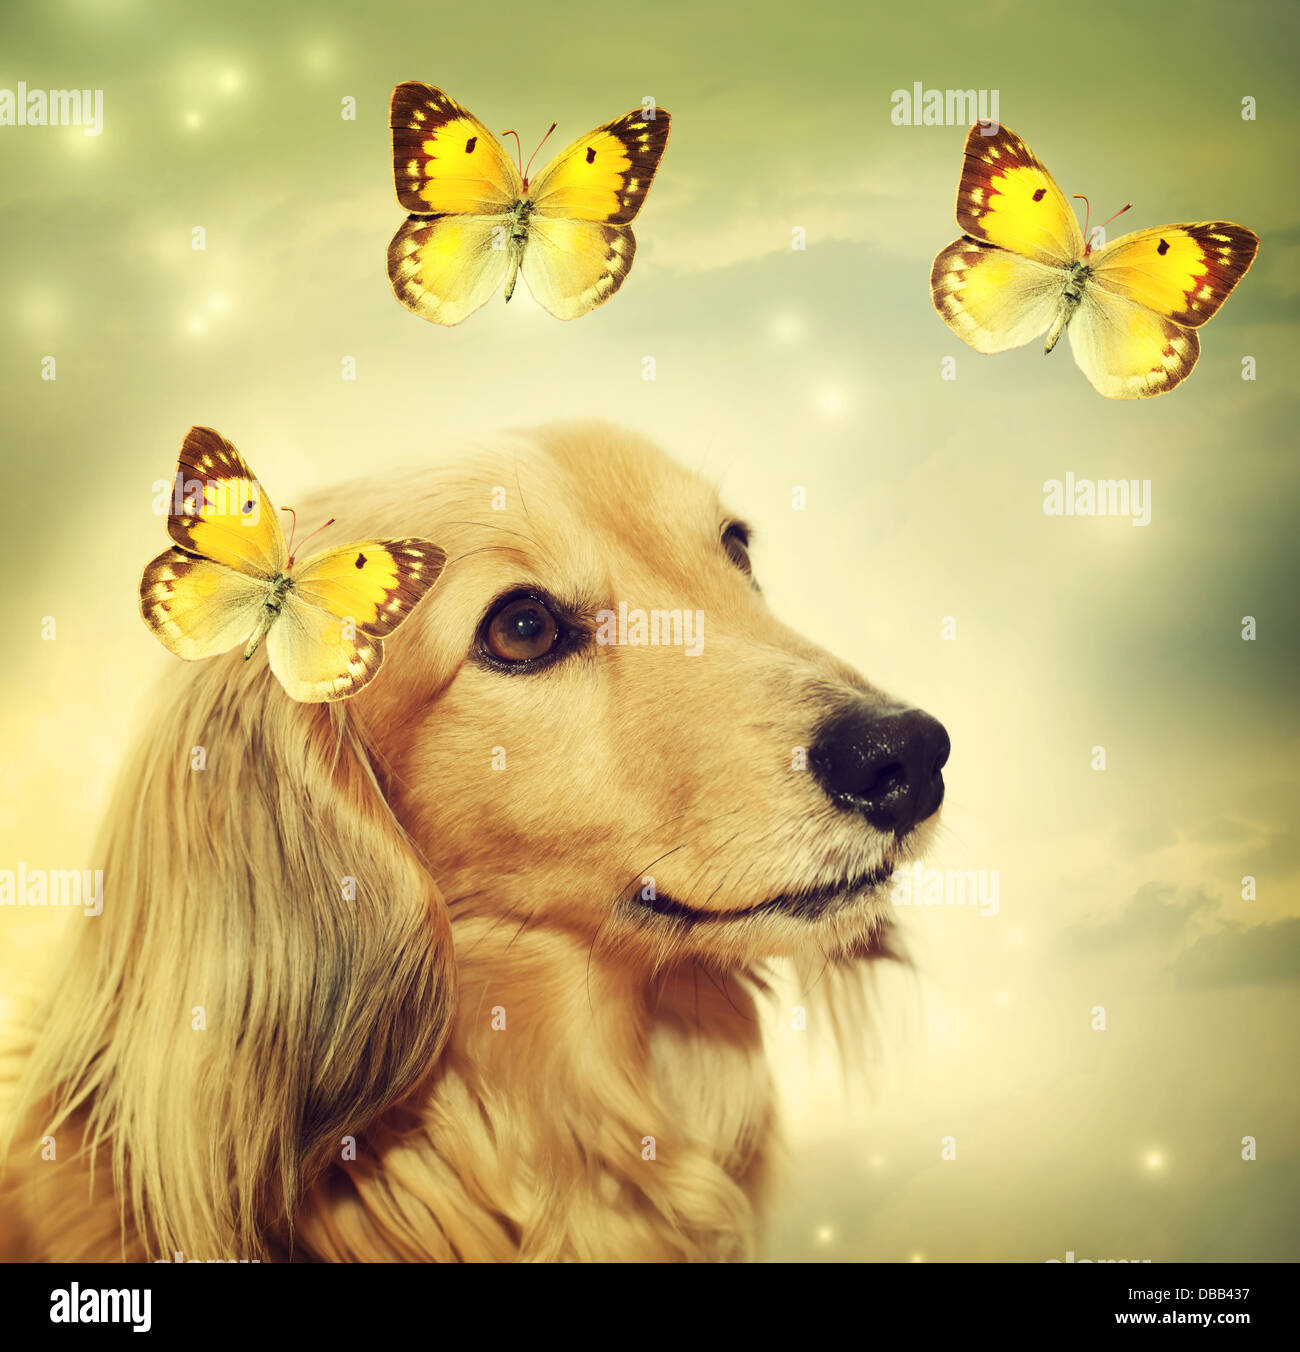 Dachshund dog with yellow butterflies on mystic lights background Stock Photo